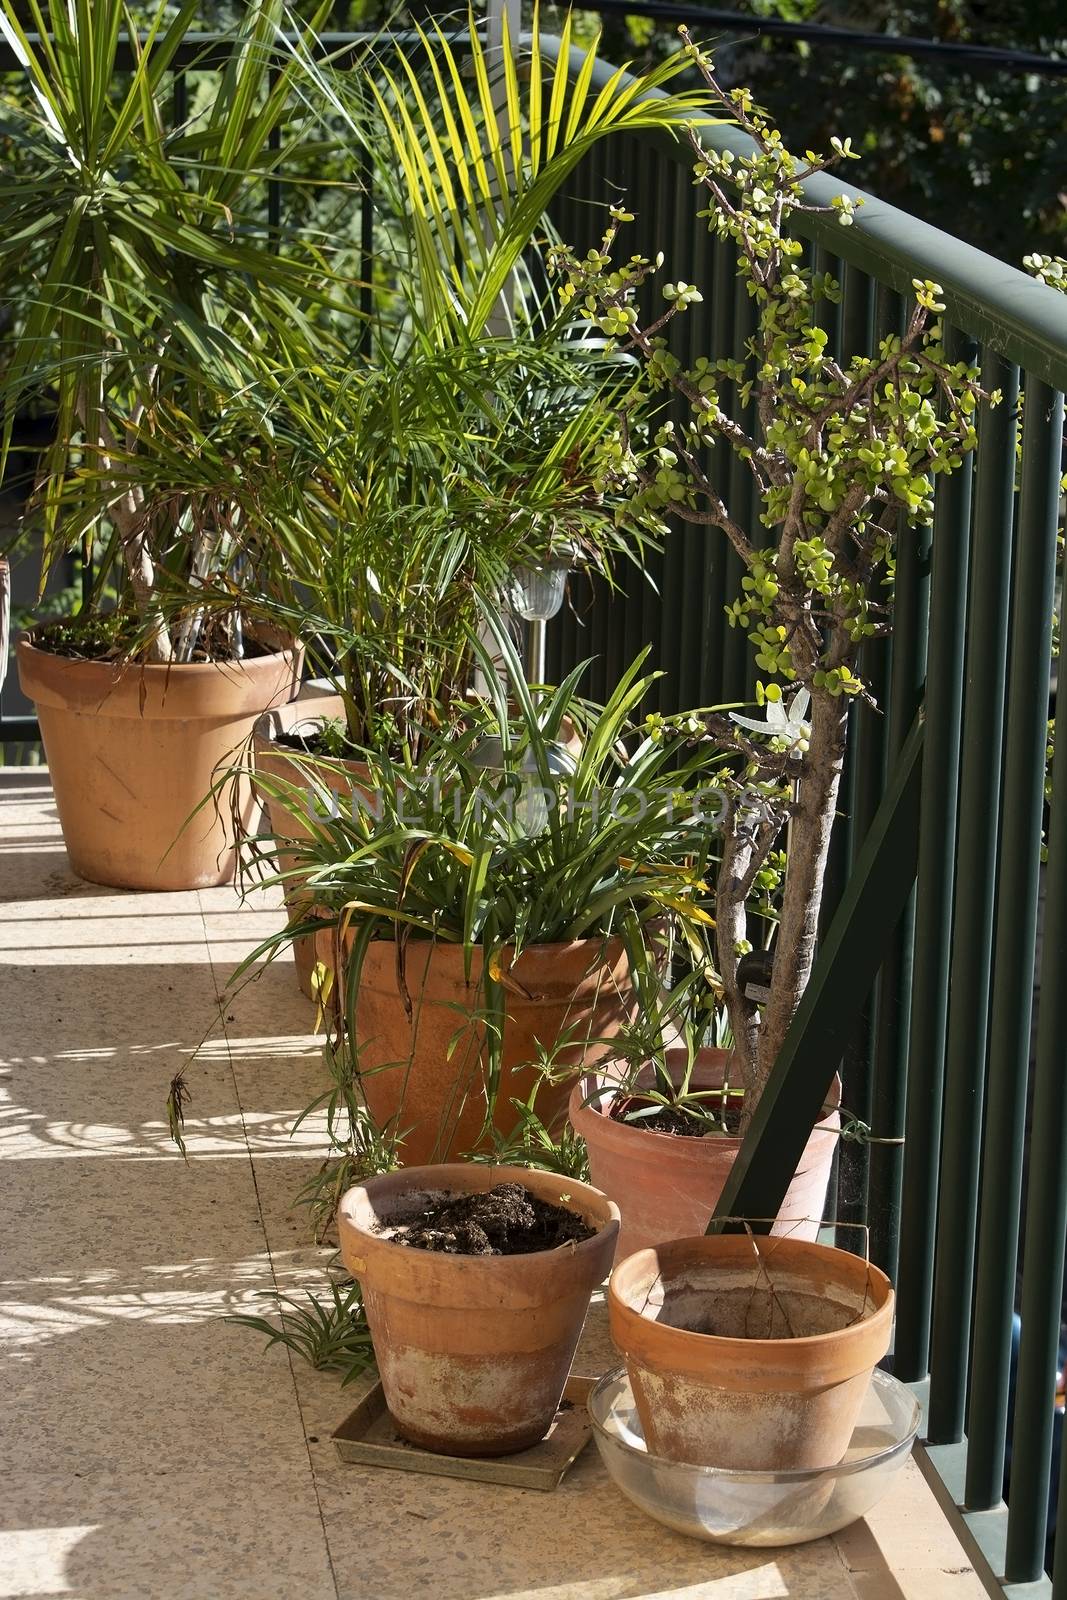 Lush green terrace with palms and other plants in terracotta pots wine barrel in Mallorca, Spain